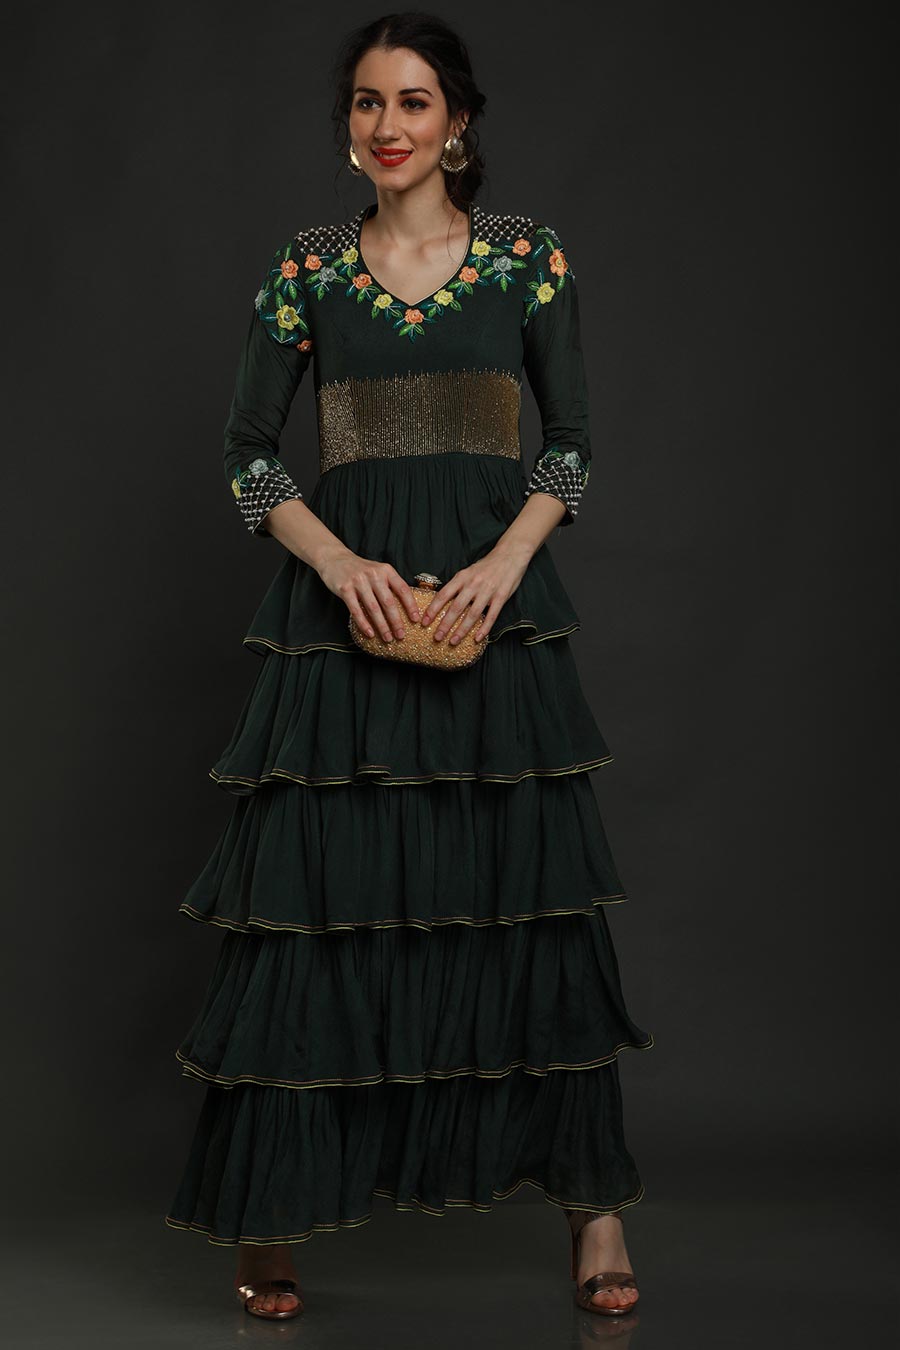 Green Embroidered Multi-Tier Gown Dress